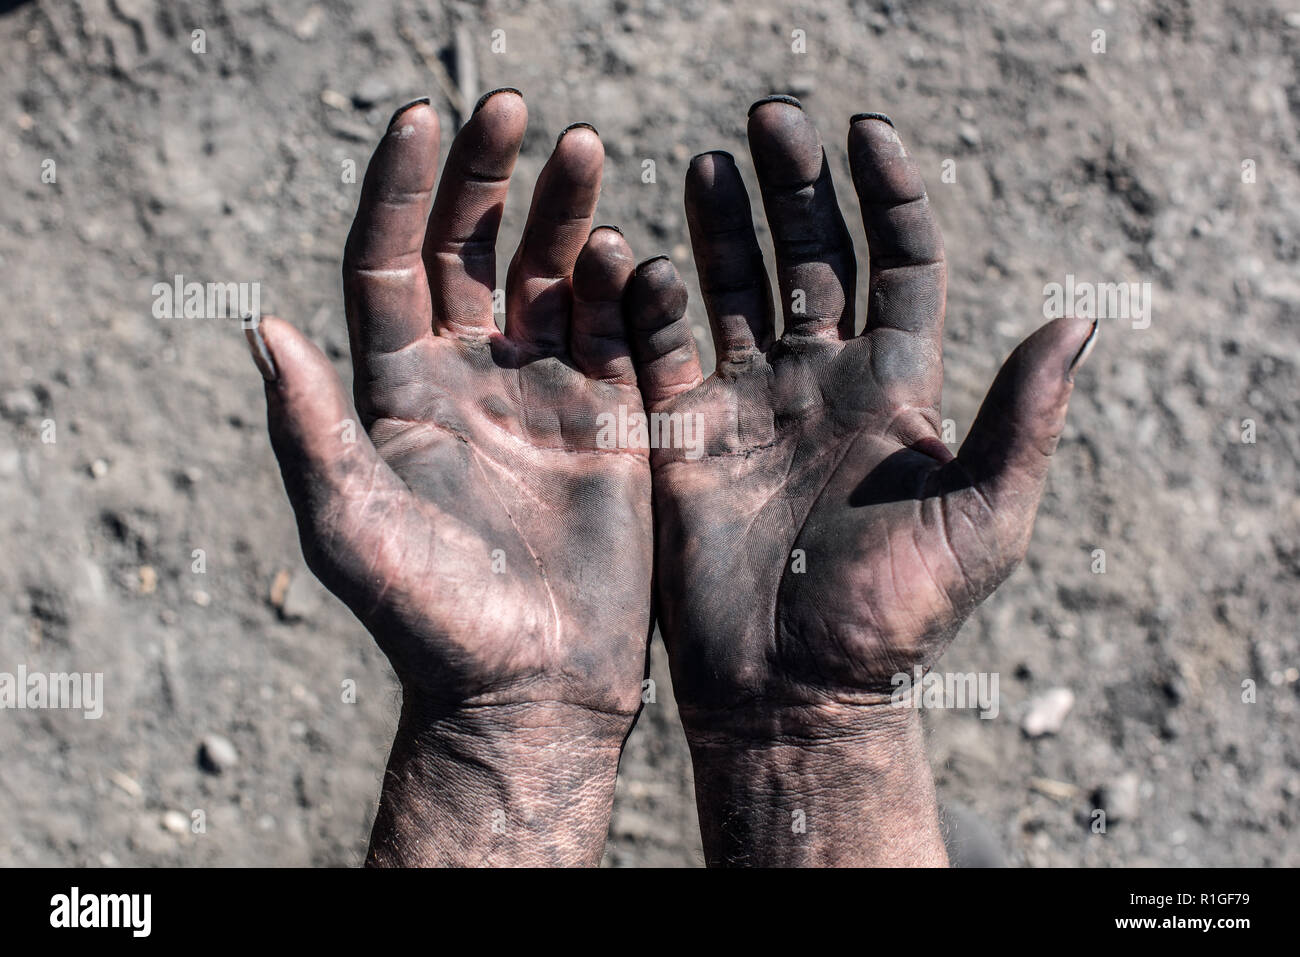 Worker Man with Dirty Hands. Charcoal-burners worker man with dirty hands. Stock Photo